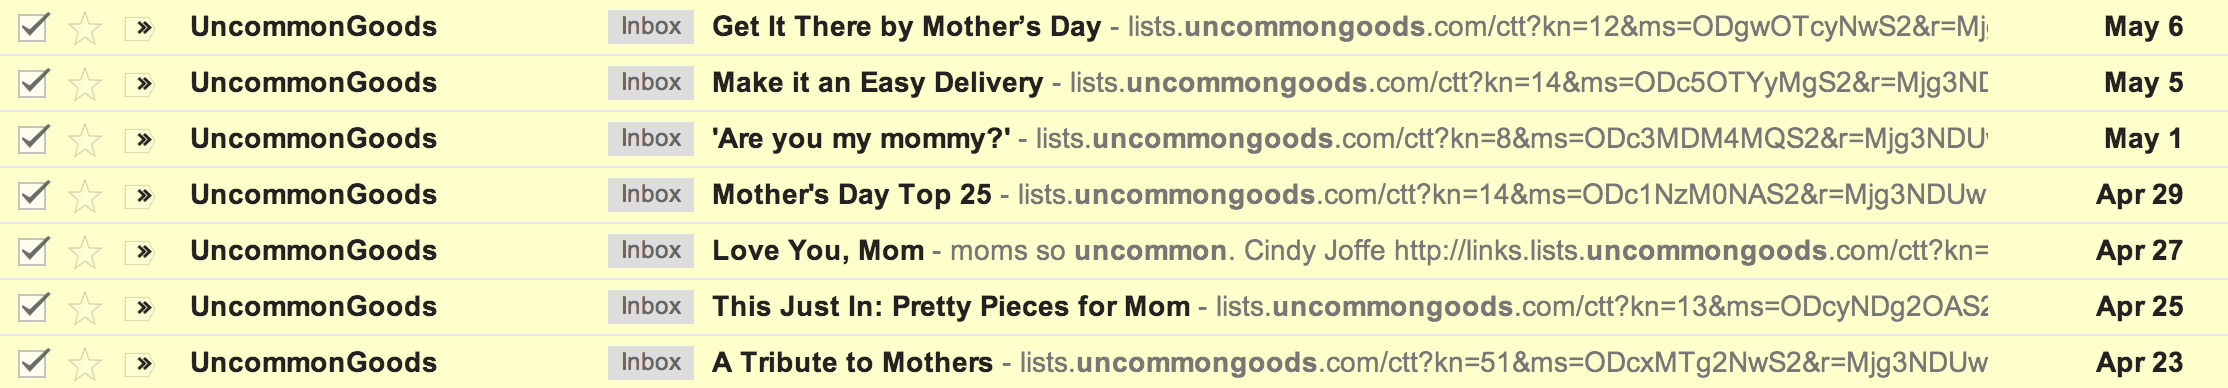 Email Subject Lines Uncommon Goods